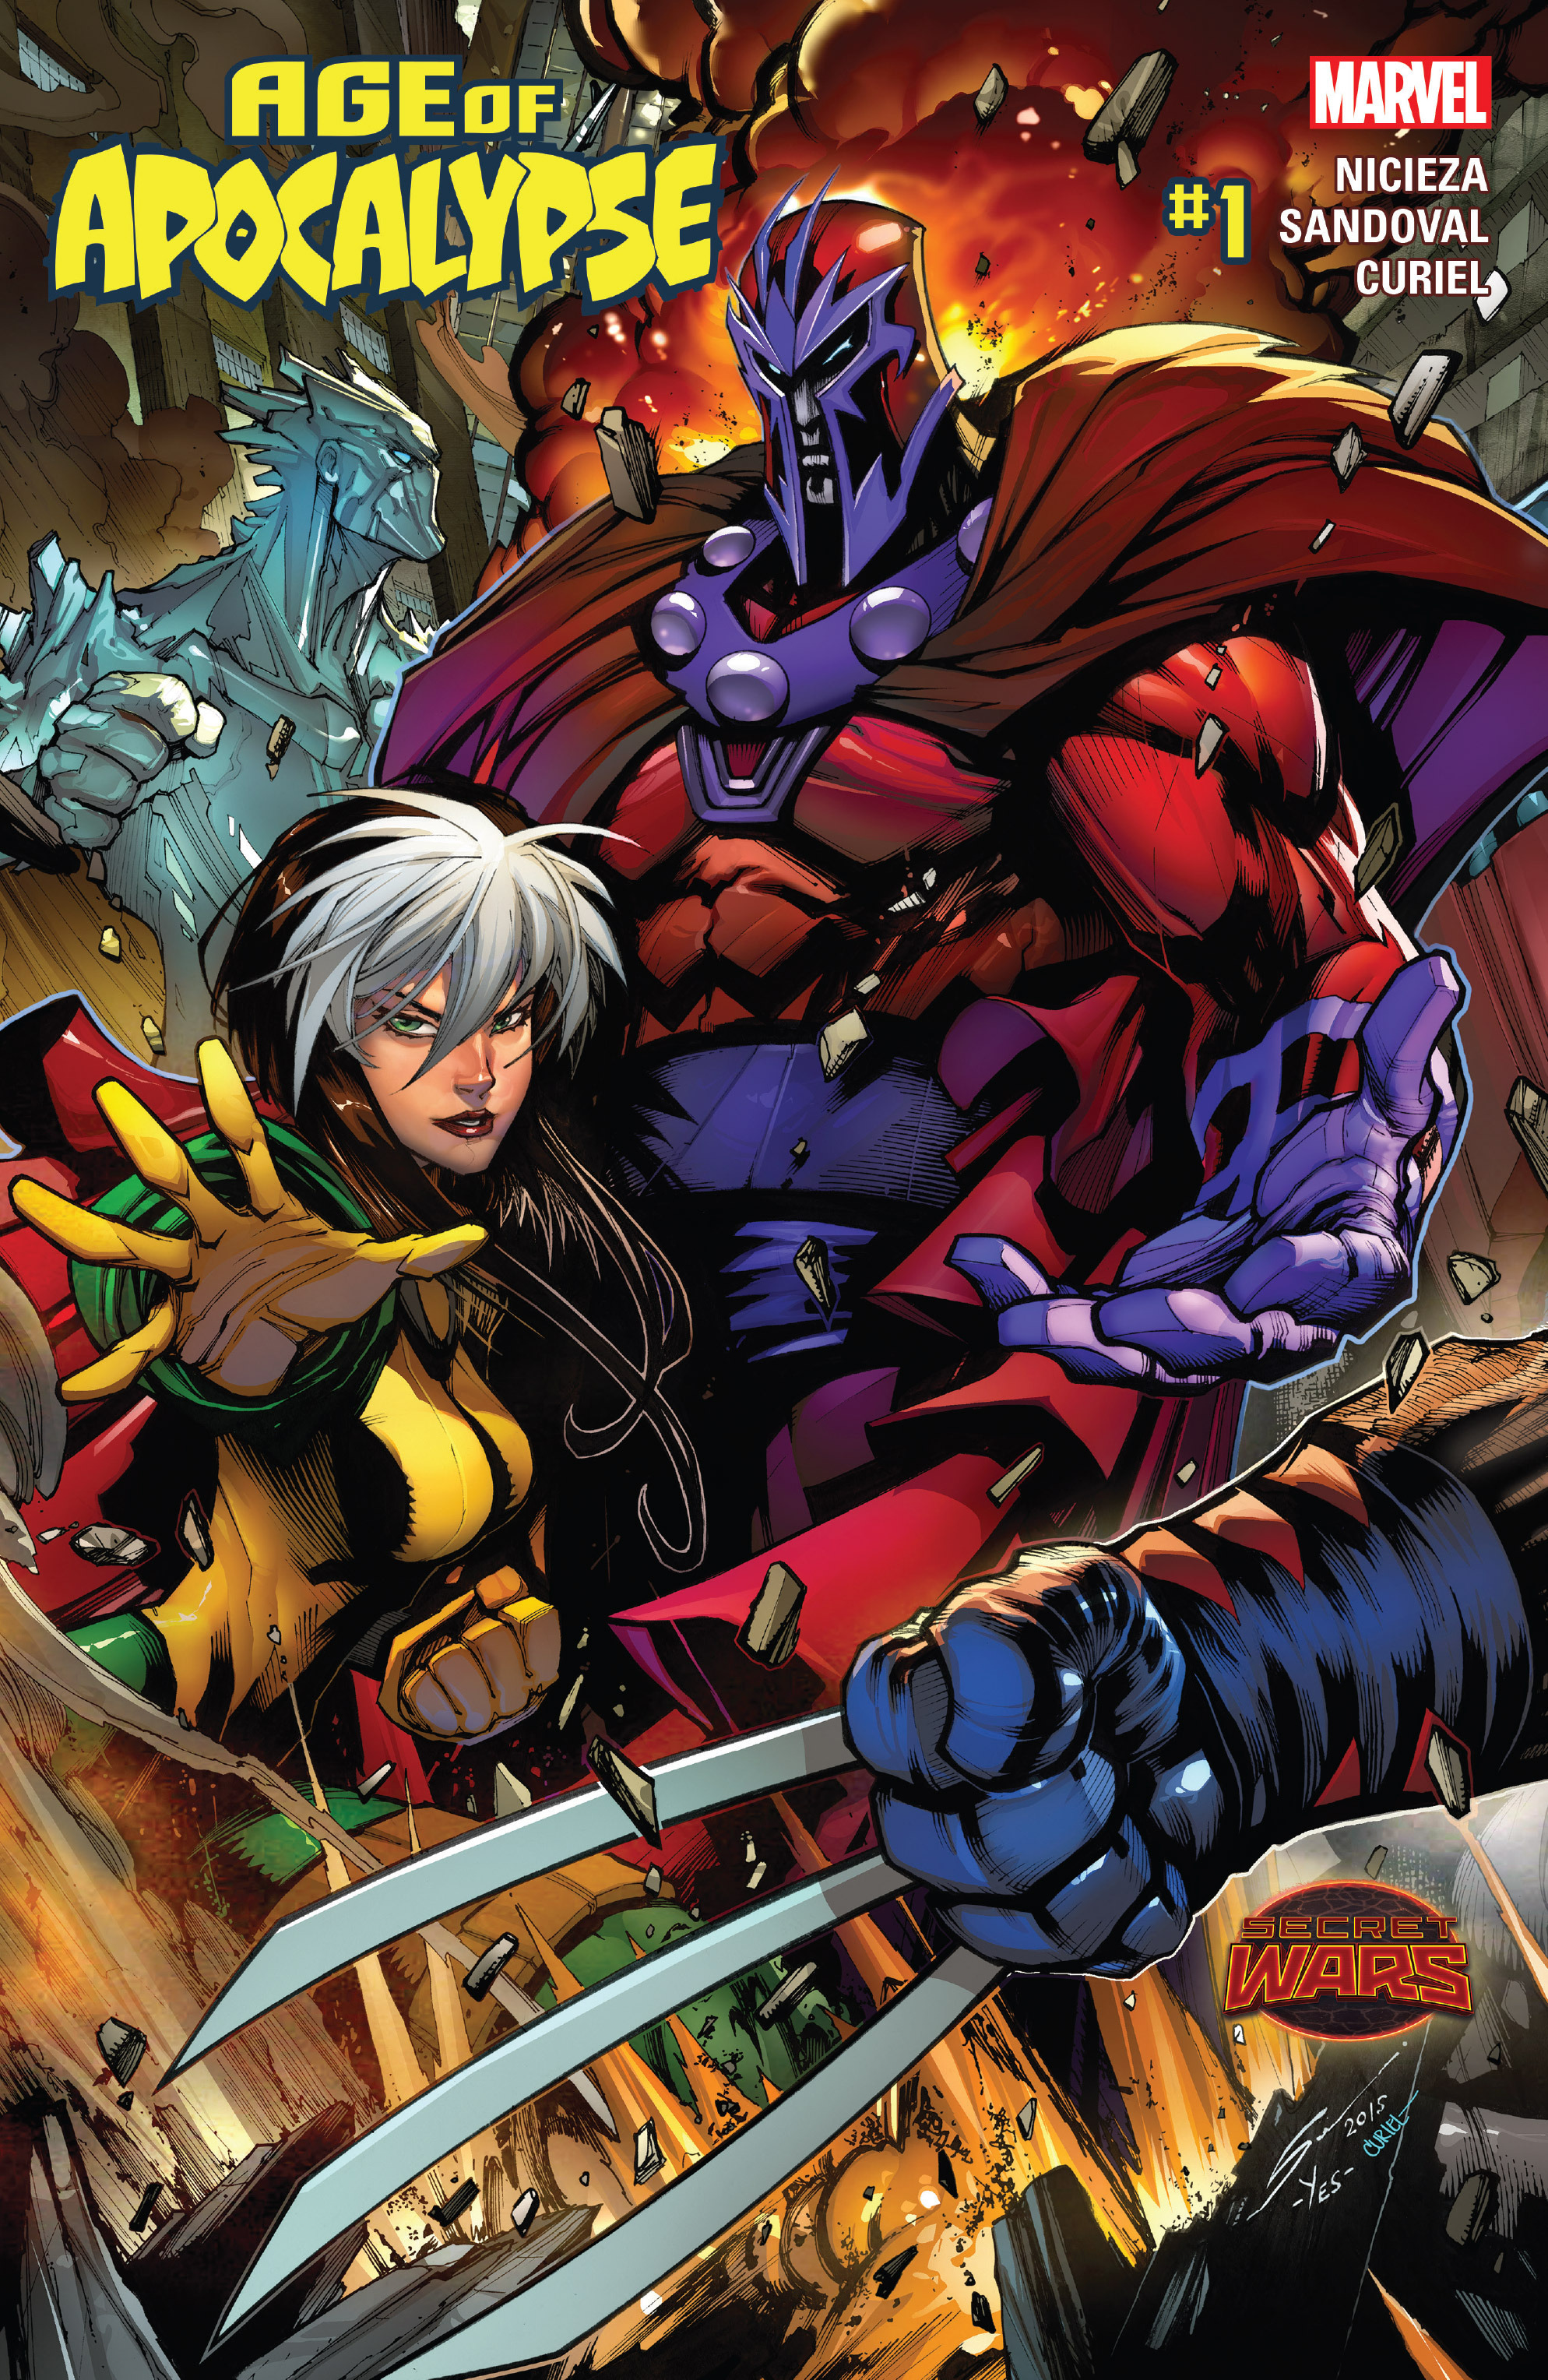 High Resolution Wallpaper | Age Of Apocalypse 1988x3056 px